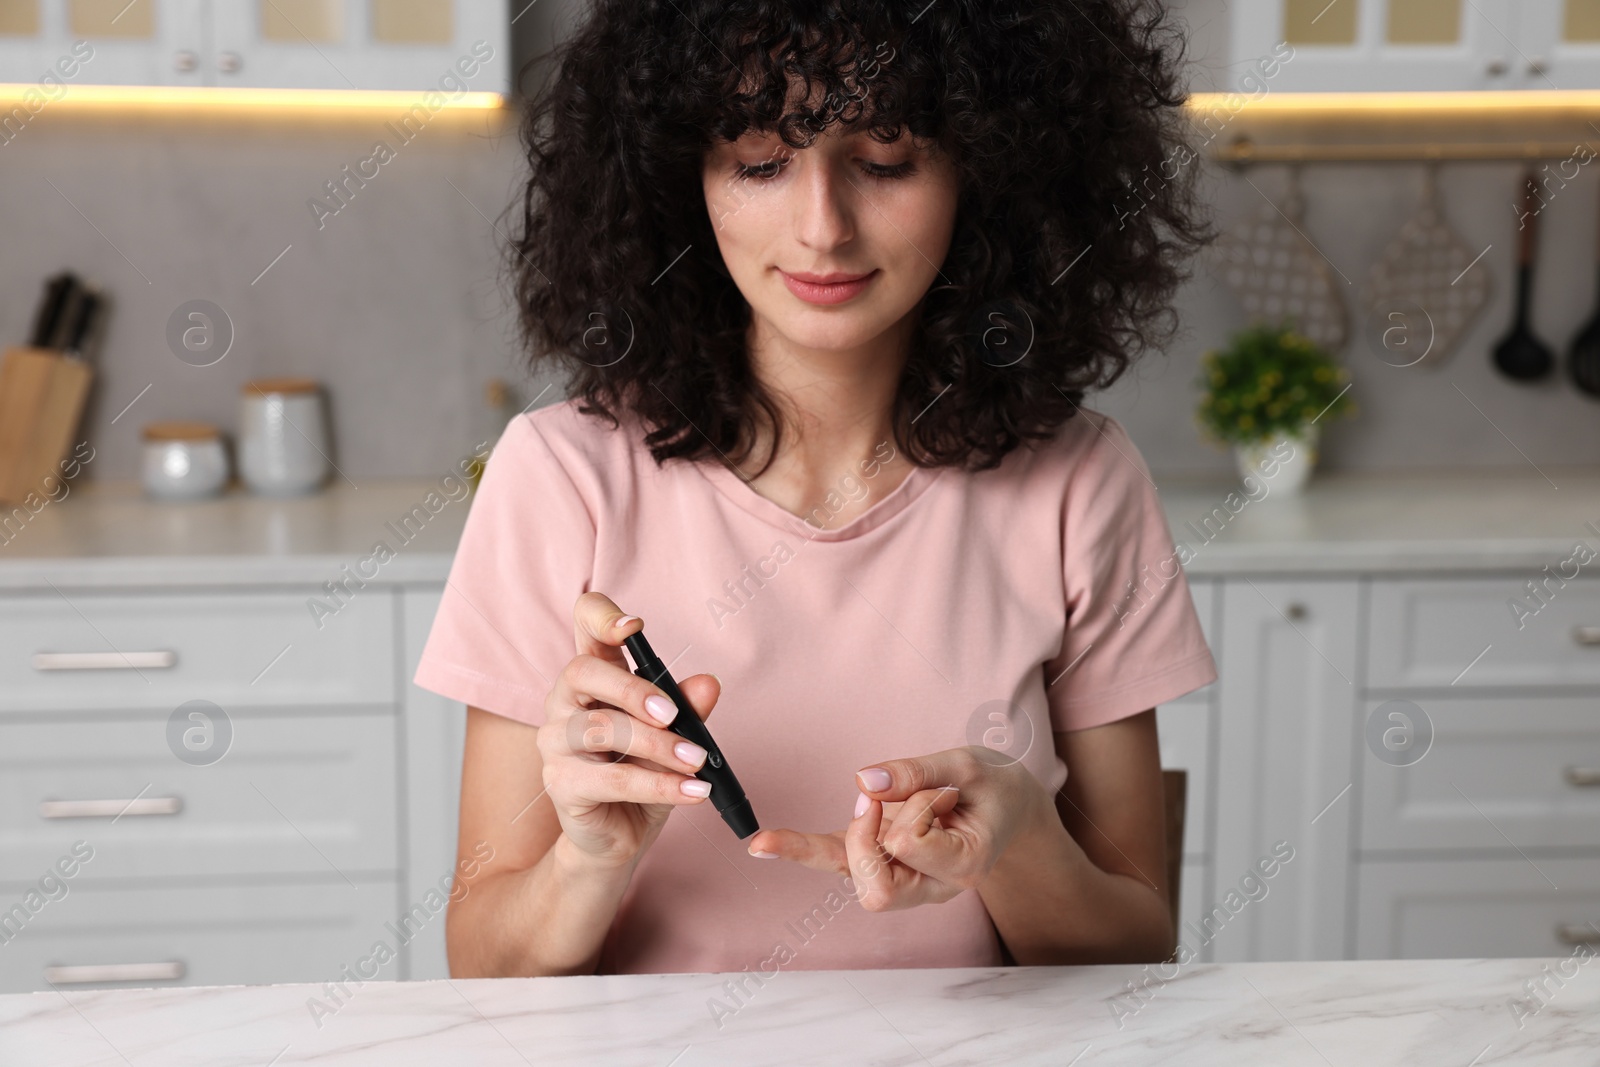 Photo of Diabetes. Woman using lancet pen at white marble table in kitchen